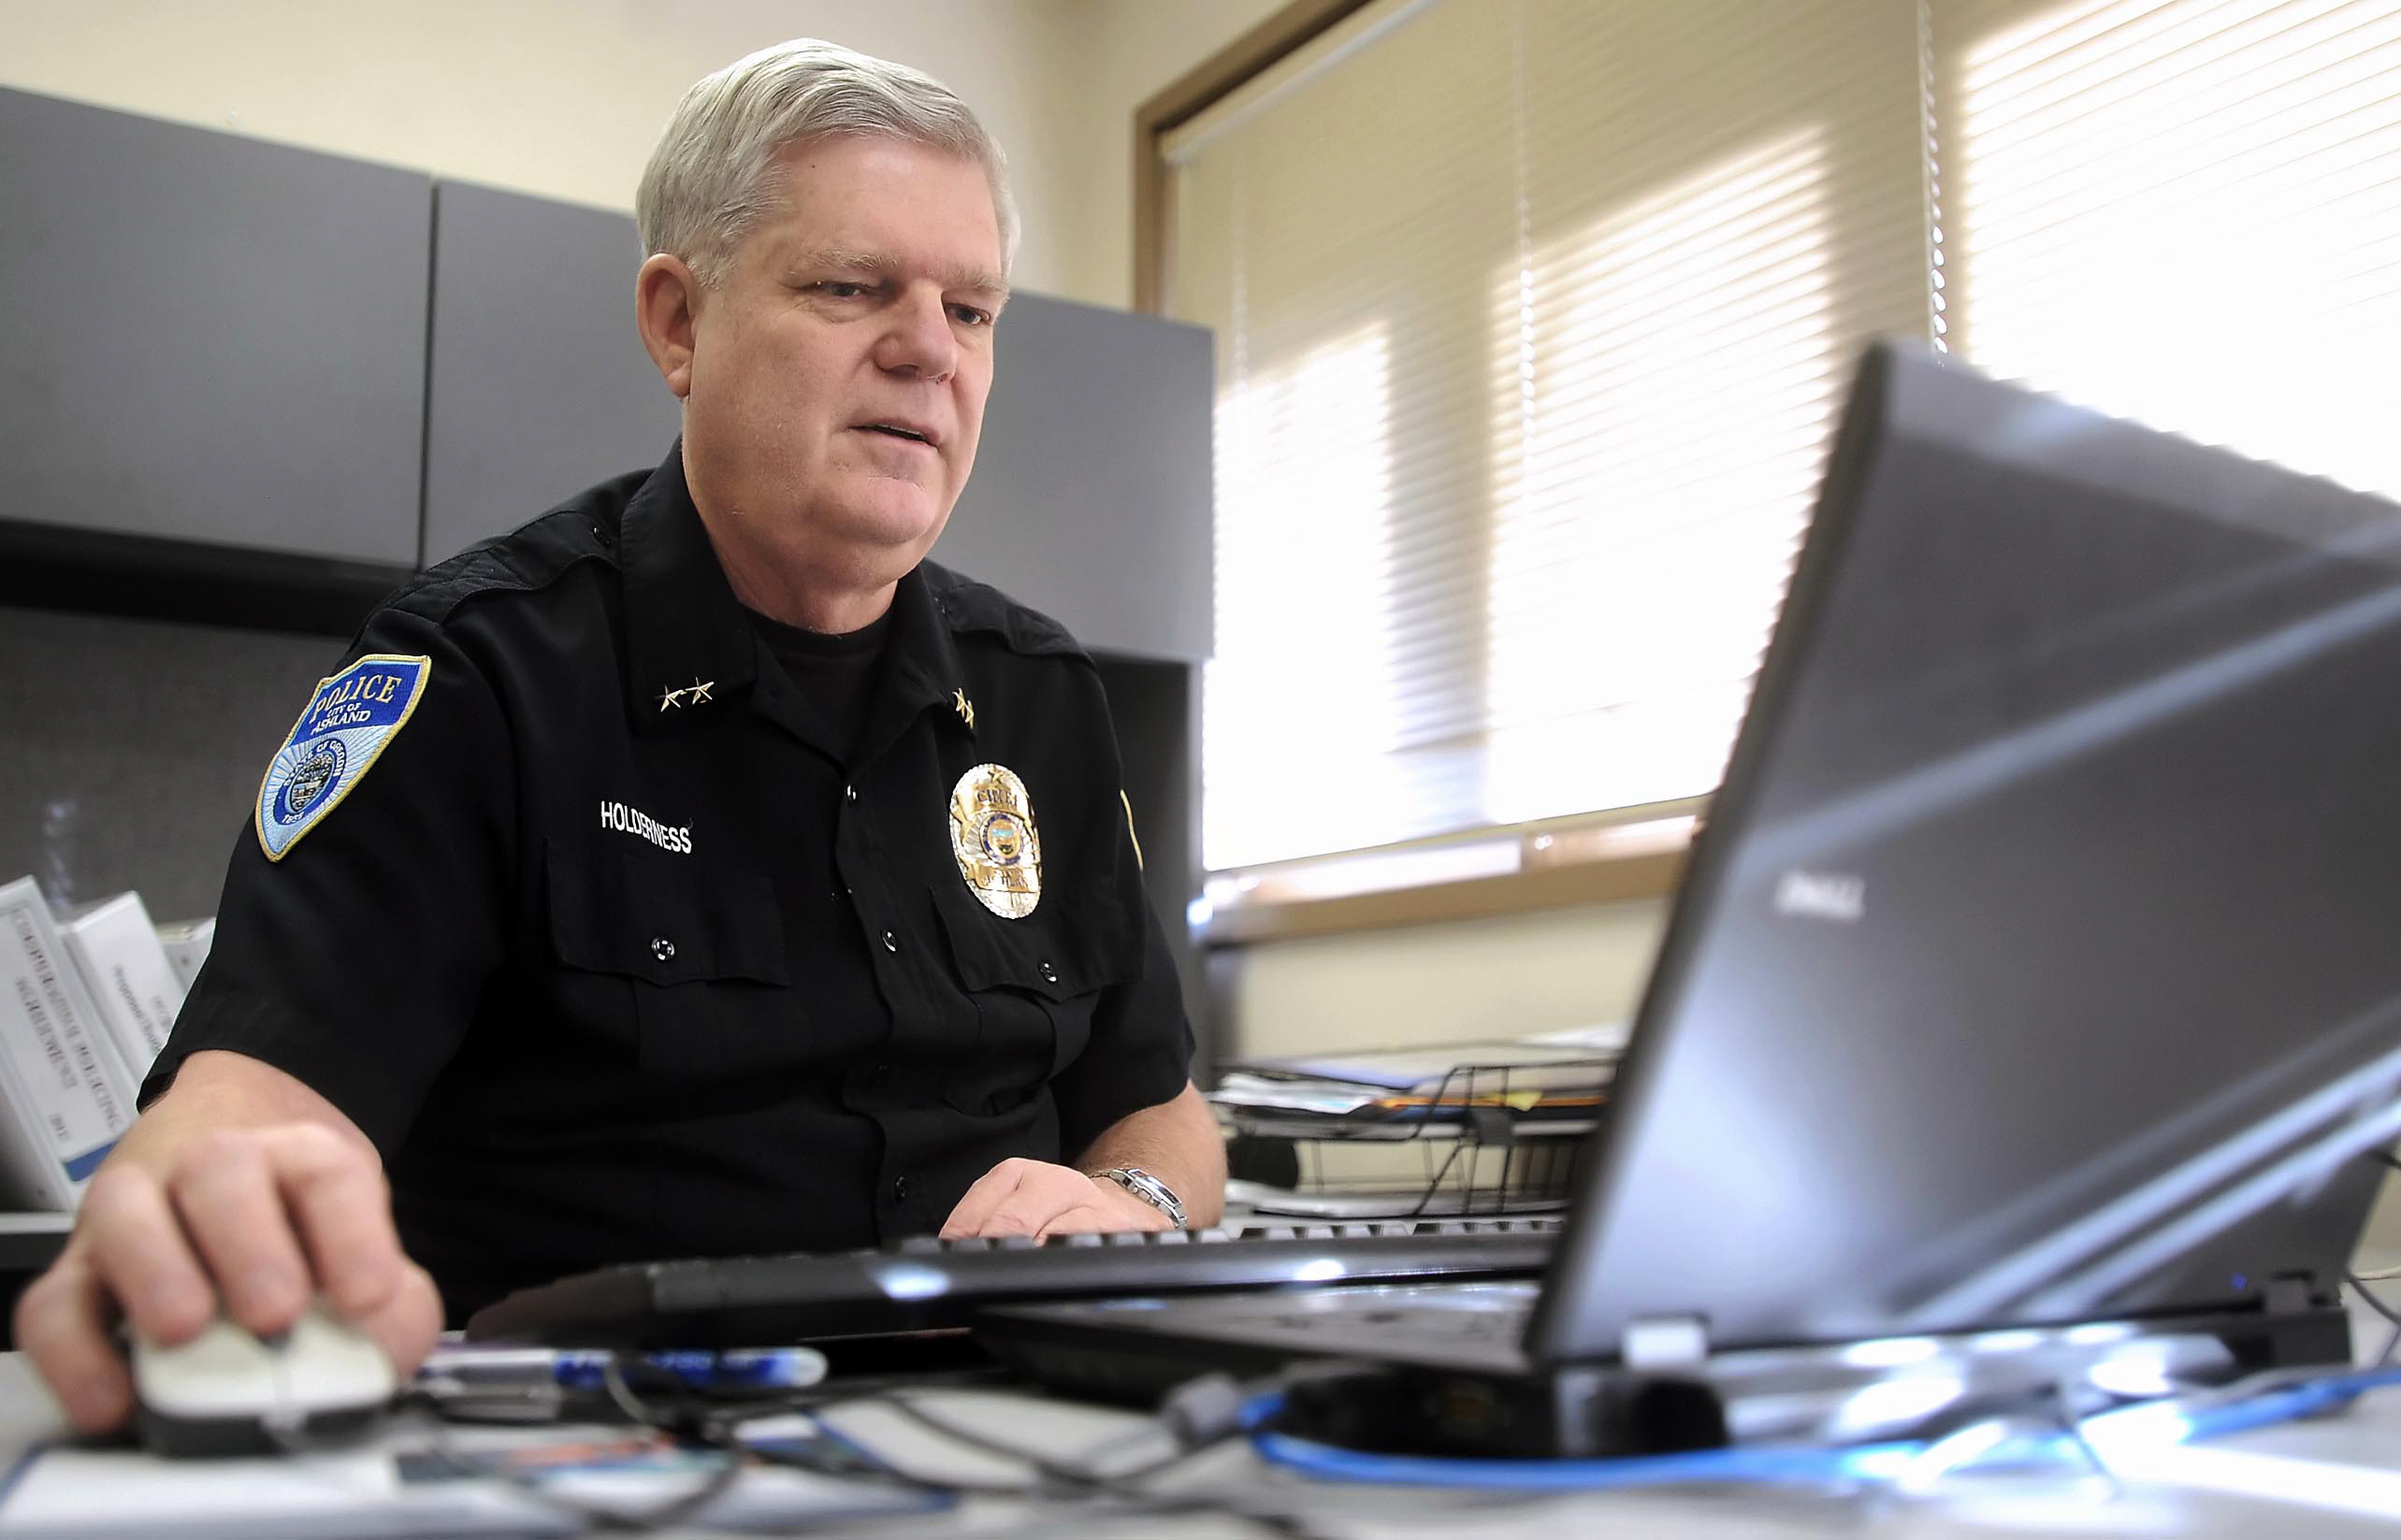 Julia Moore/The Medford Mail Tribune
Ashland police Chief Terry Holderness browses a new website that will encourage sexual assault victims to report attacks once it goes live in January in Ashland, Ore.